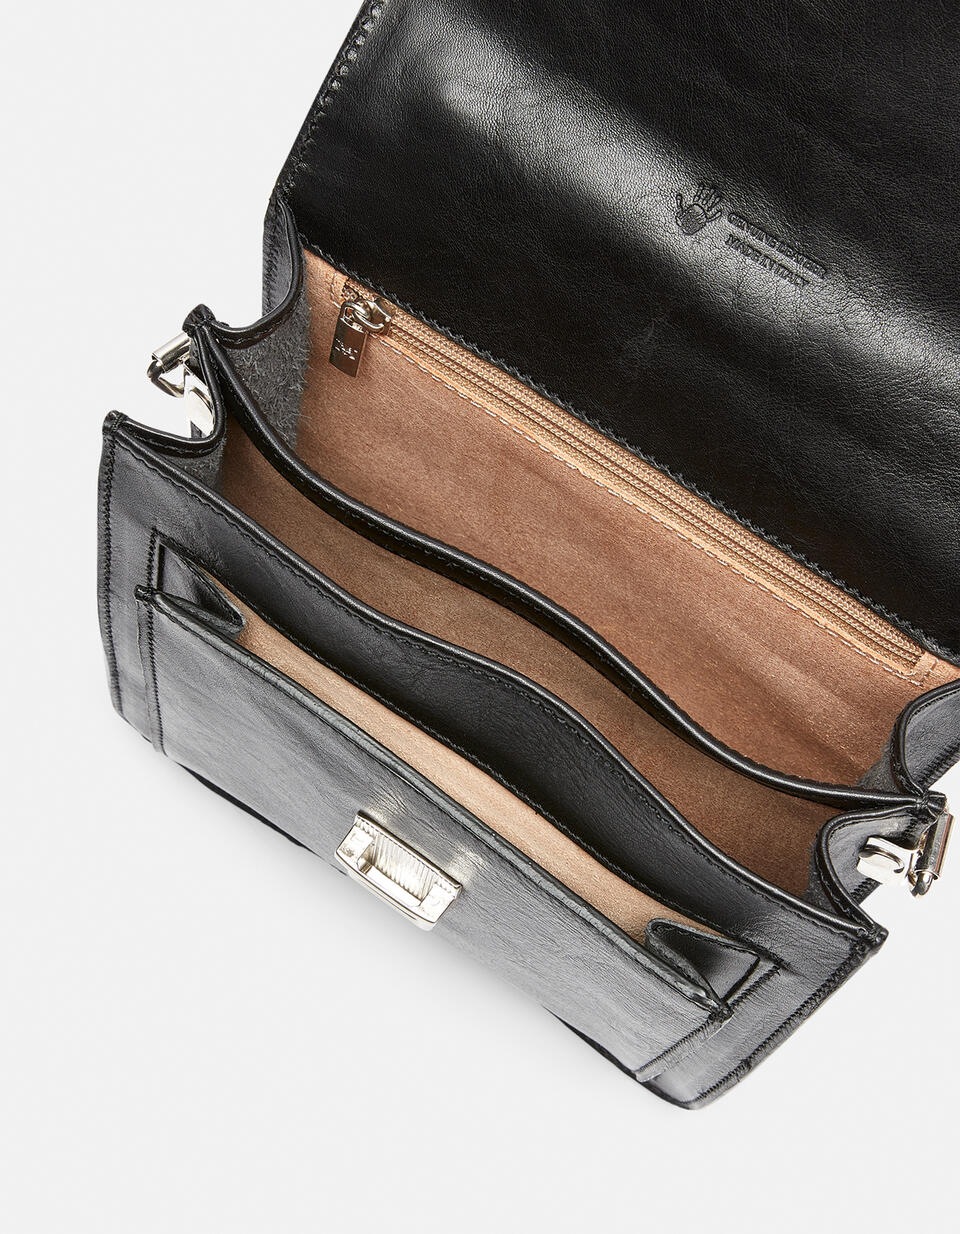 Oxford men's classic shoulder bag in vegetable tanned leather - Crossbody Bags - MEN'S BAGS | bags NERO - Crossbody Bags - MEN'S BAGS | bagsCuoieria Fiorentina